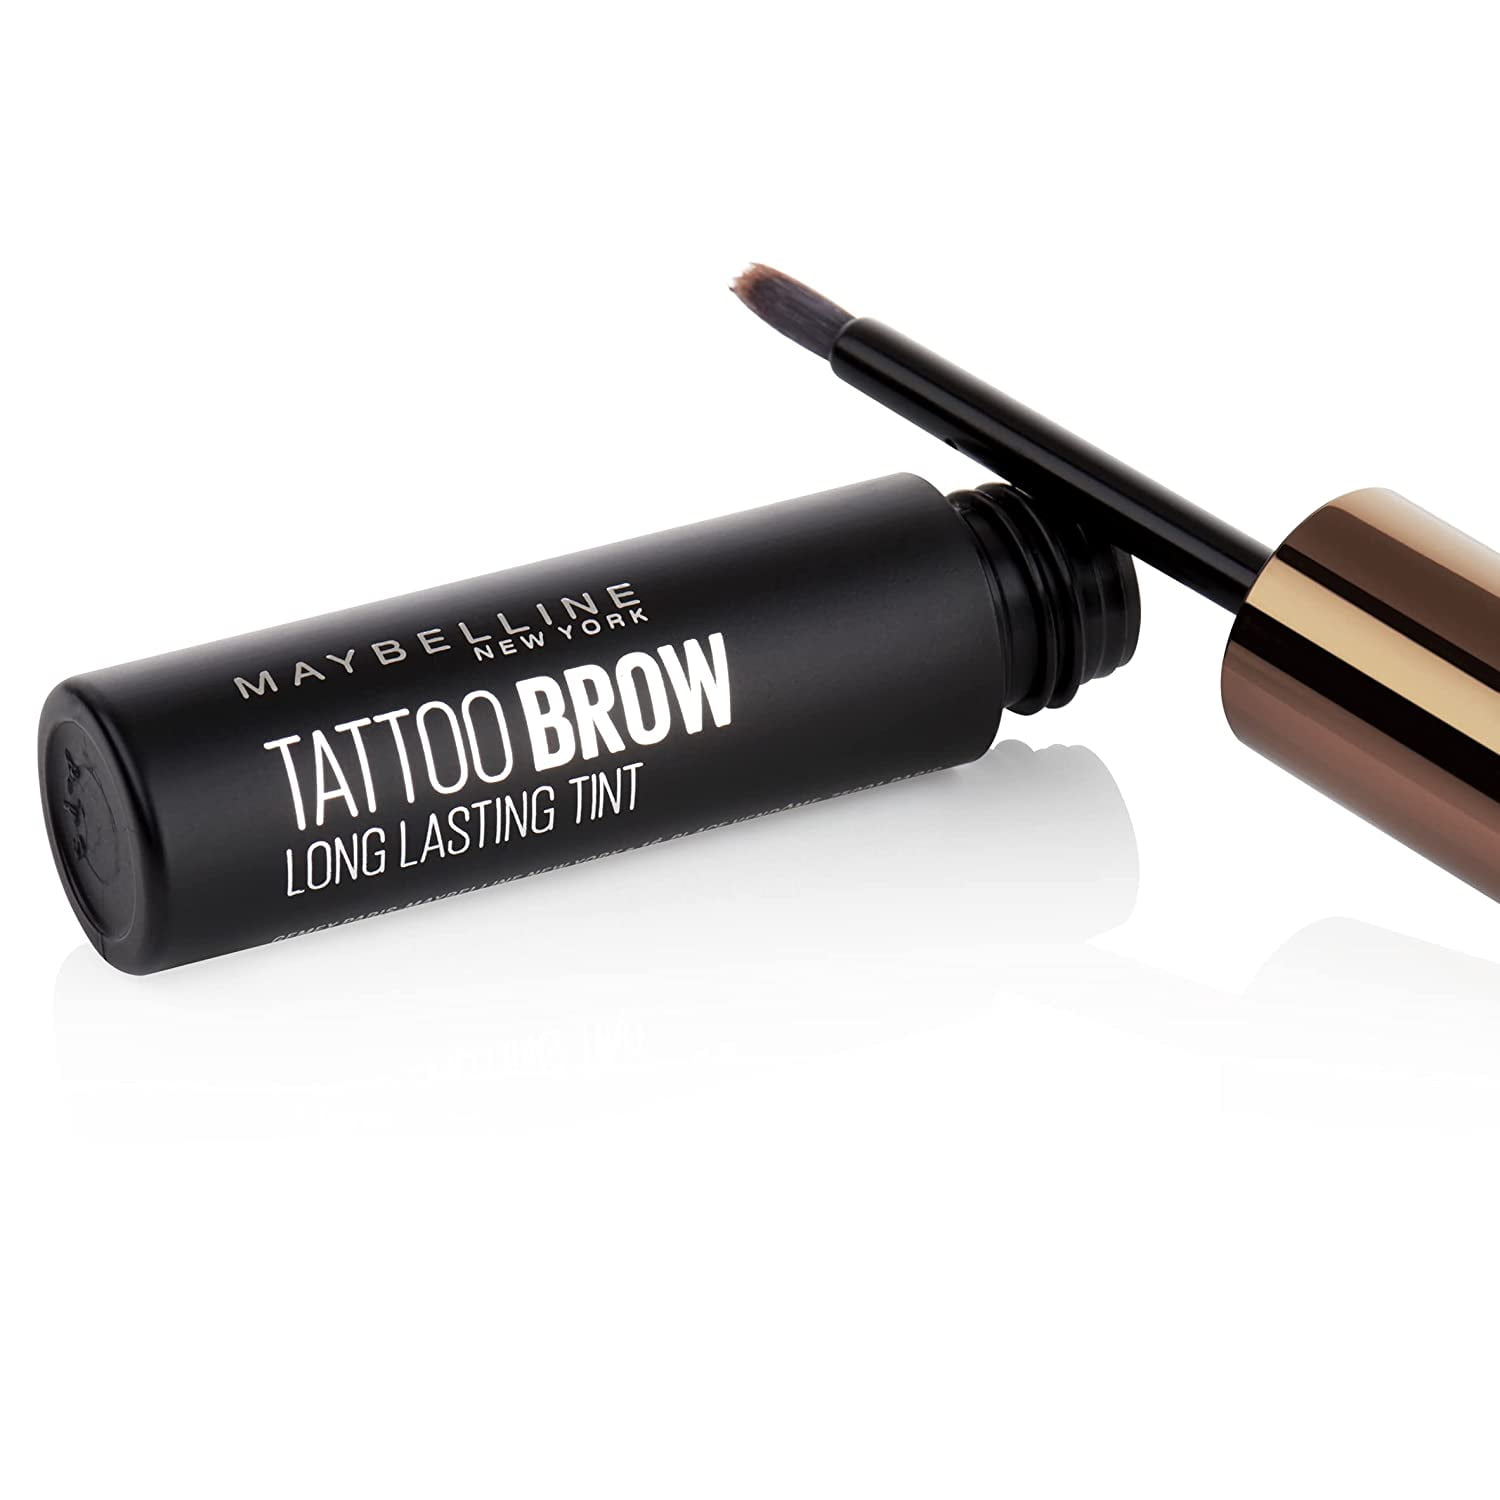 4.6g Tattoo Brown Light Brow, Maybelline Maybelline